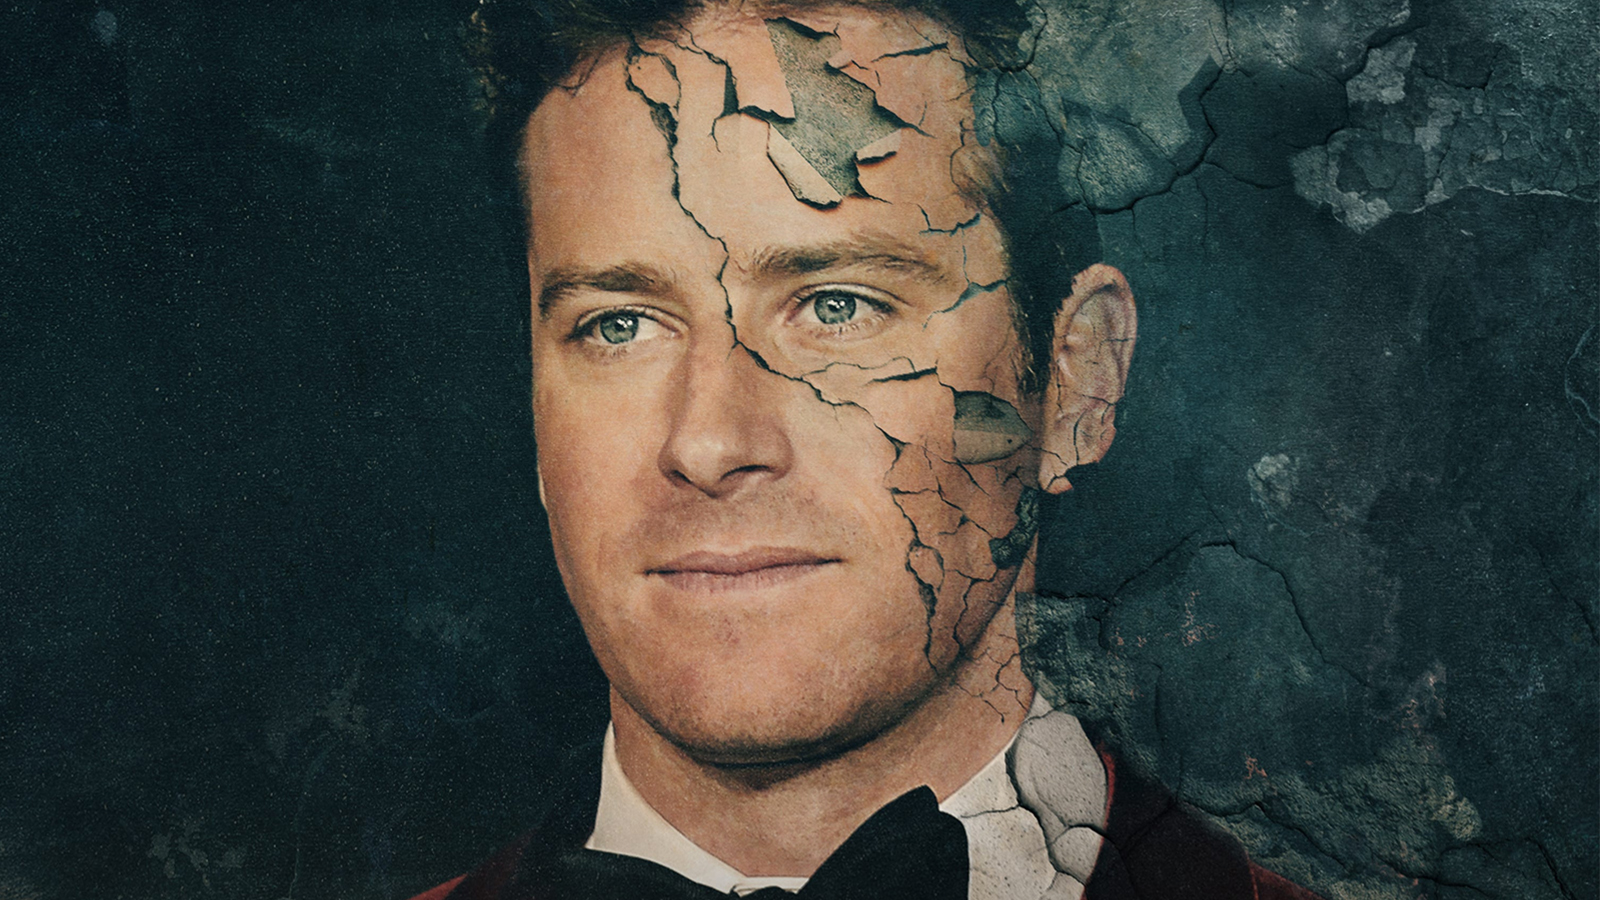 Where To Watch ‘House of Hammer’: The Armie Hammer Documentary